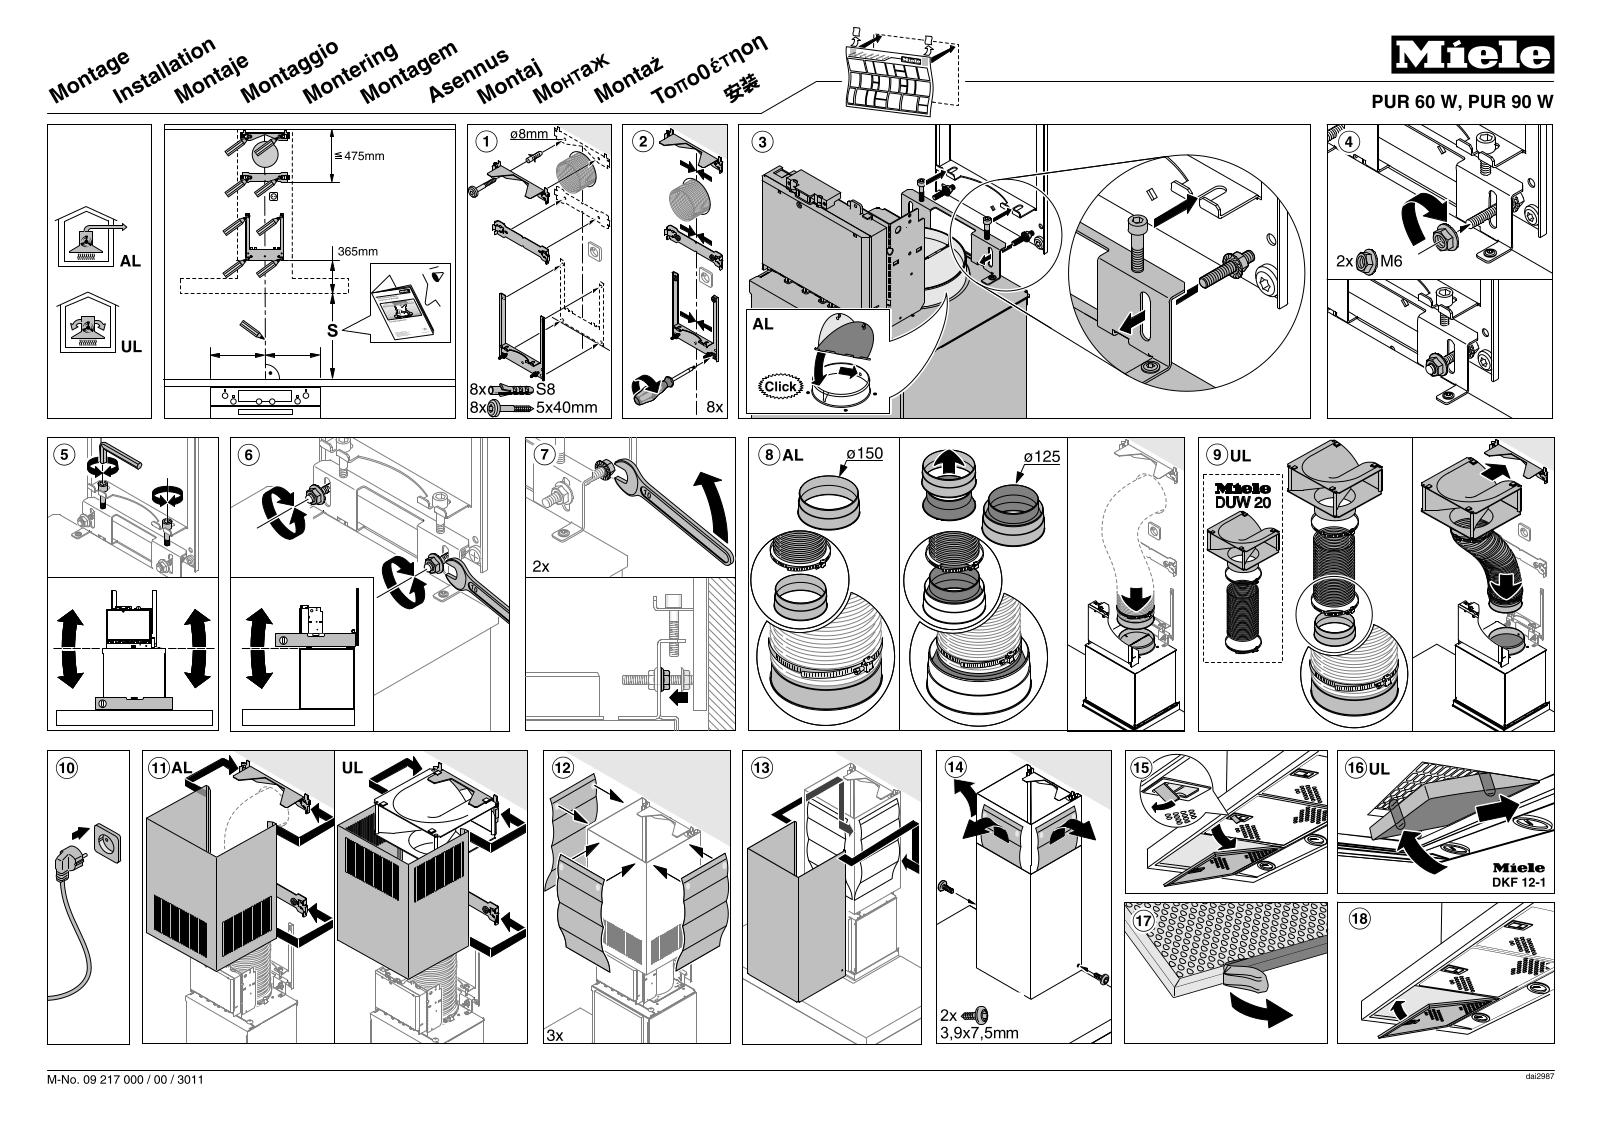 Miele PUR 90 W, PUR 60 W Assembly instructions